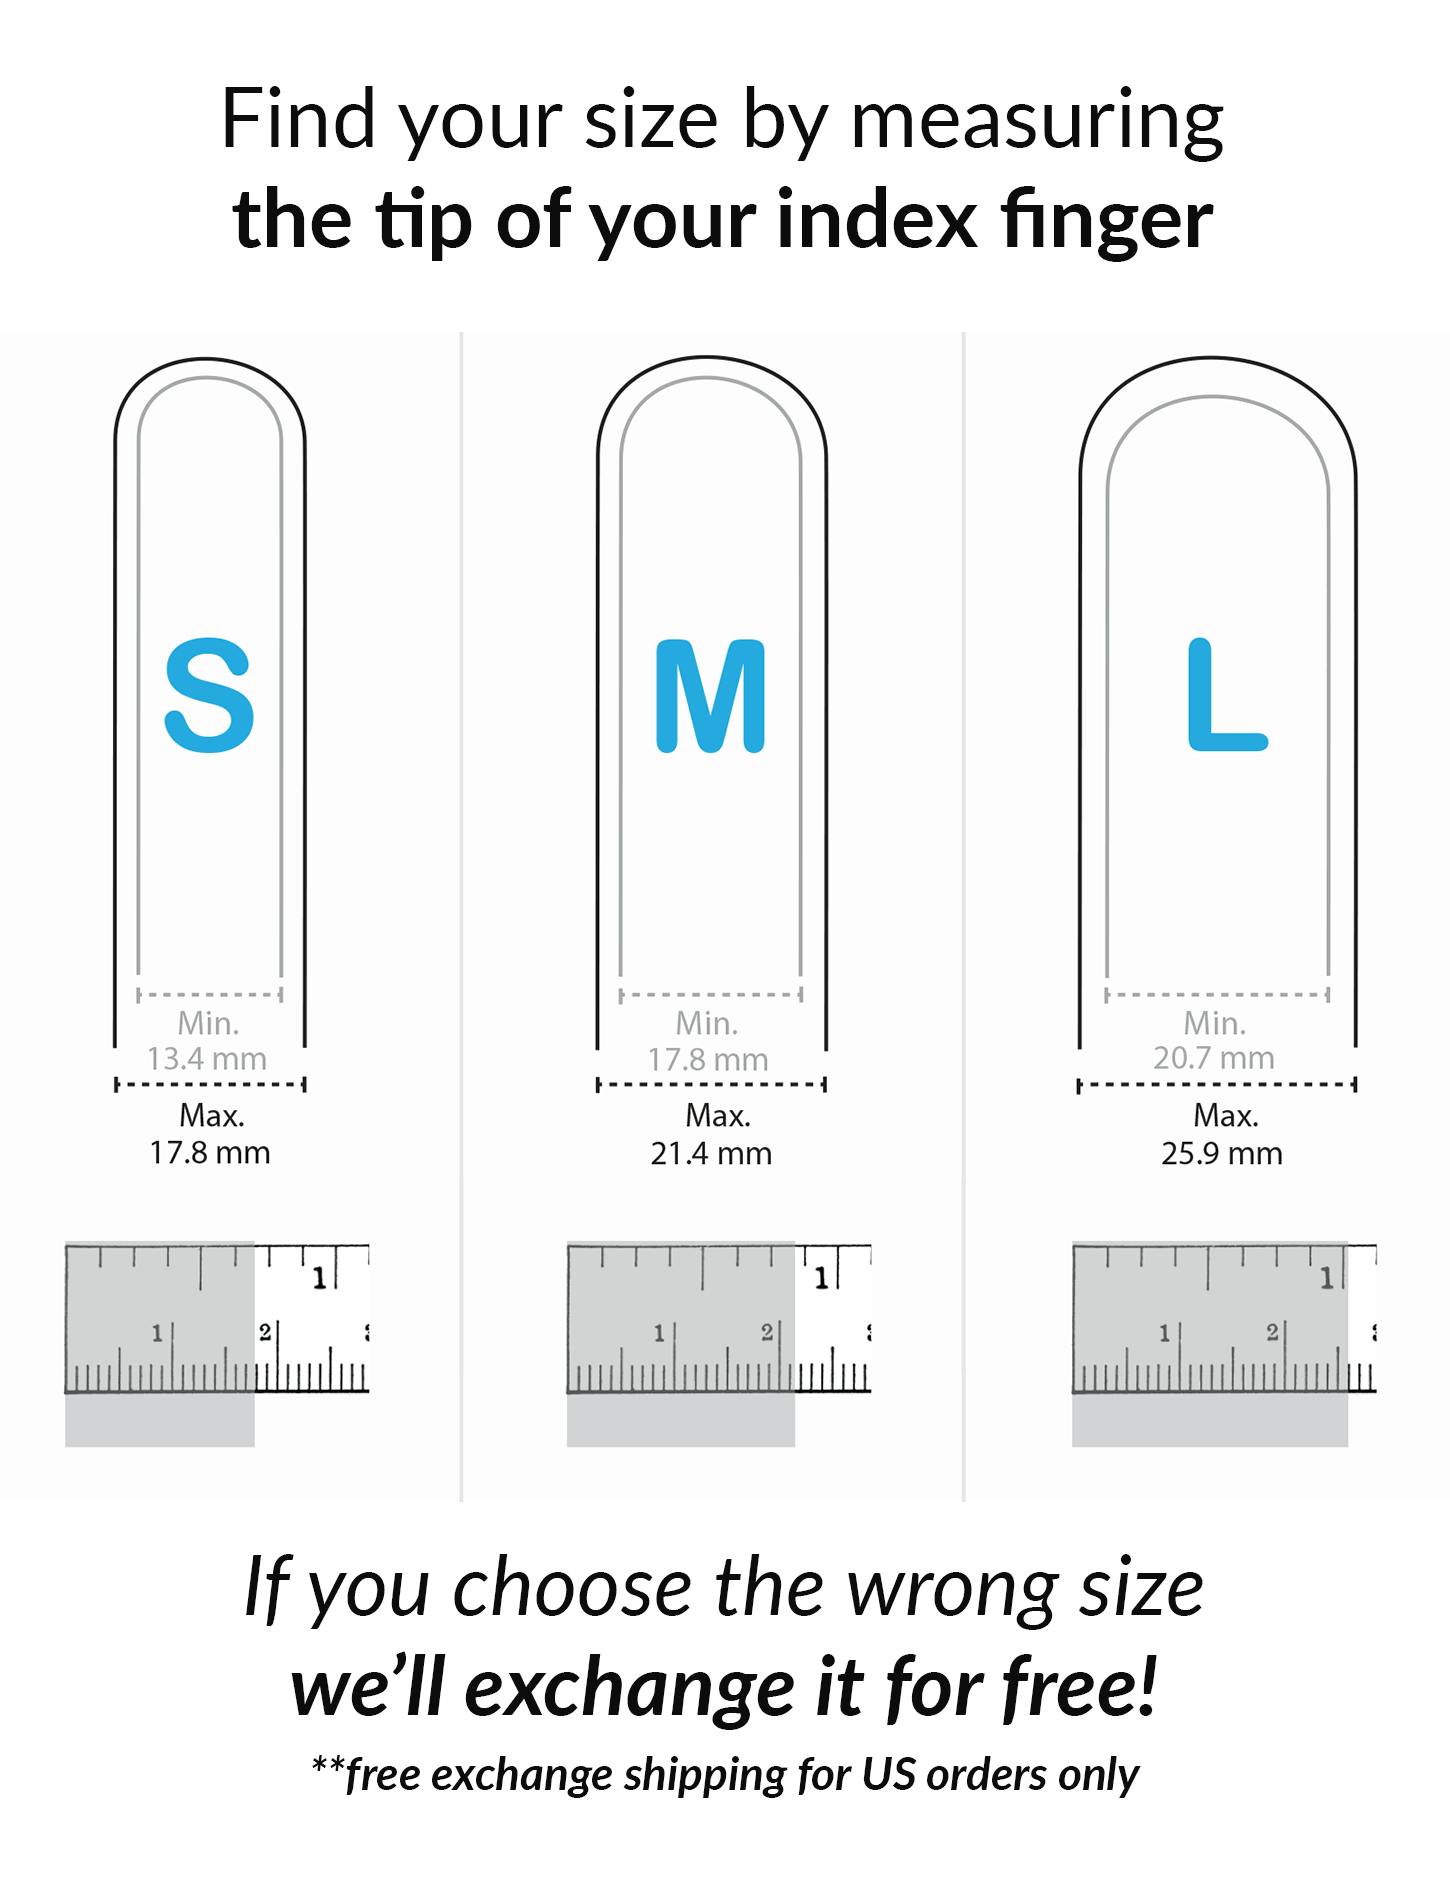 Finger size chart for MusicGlove showing small, medium, and large and free exchange policy